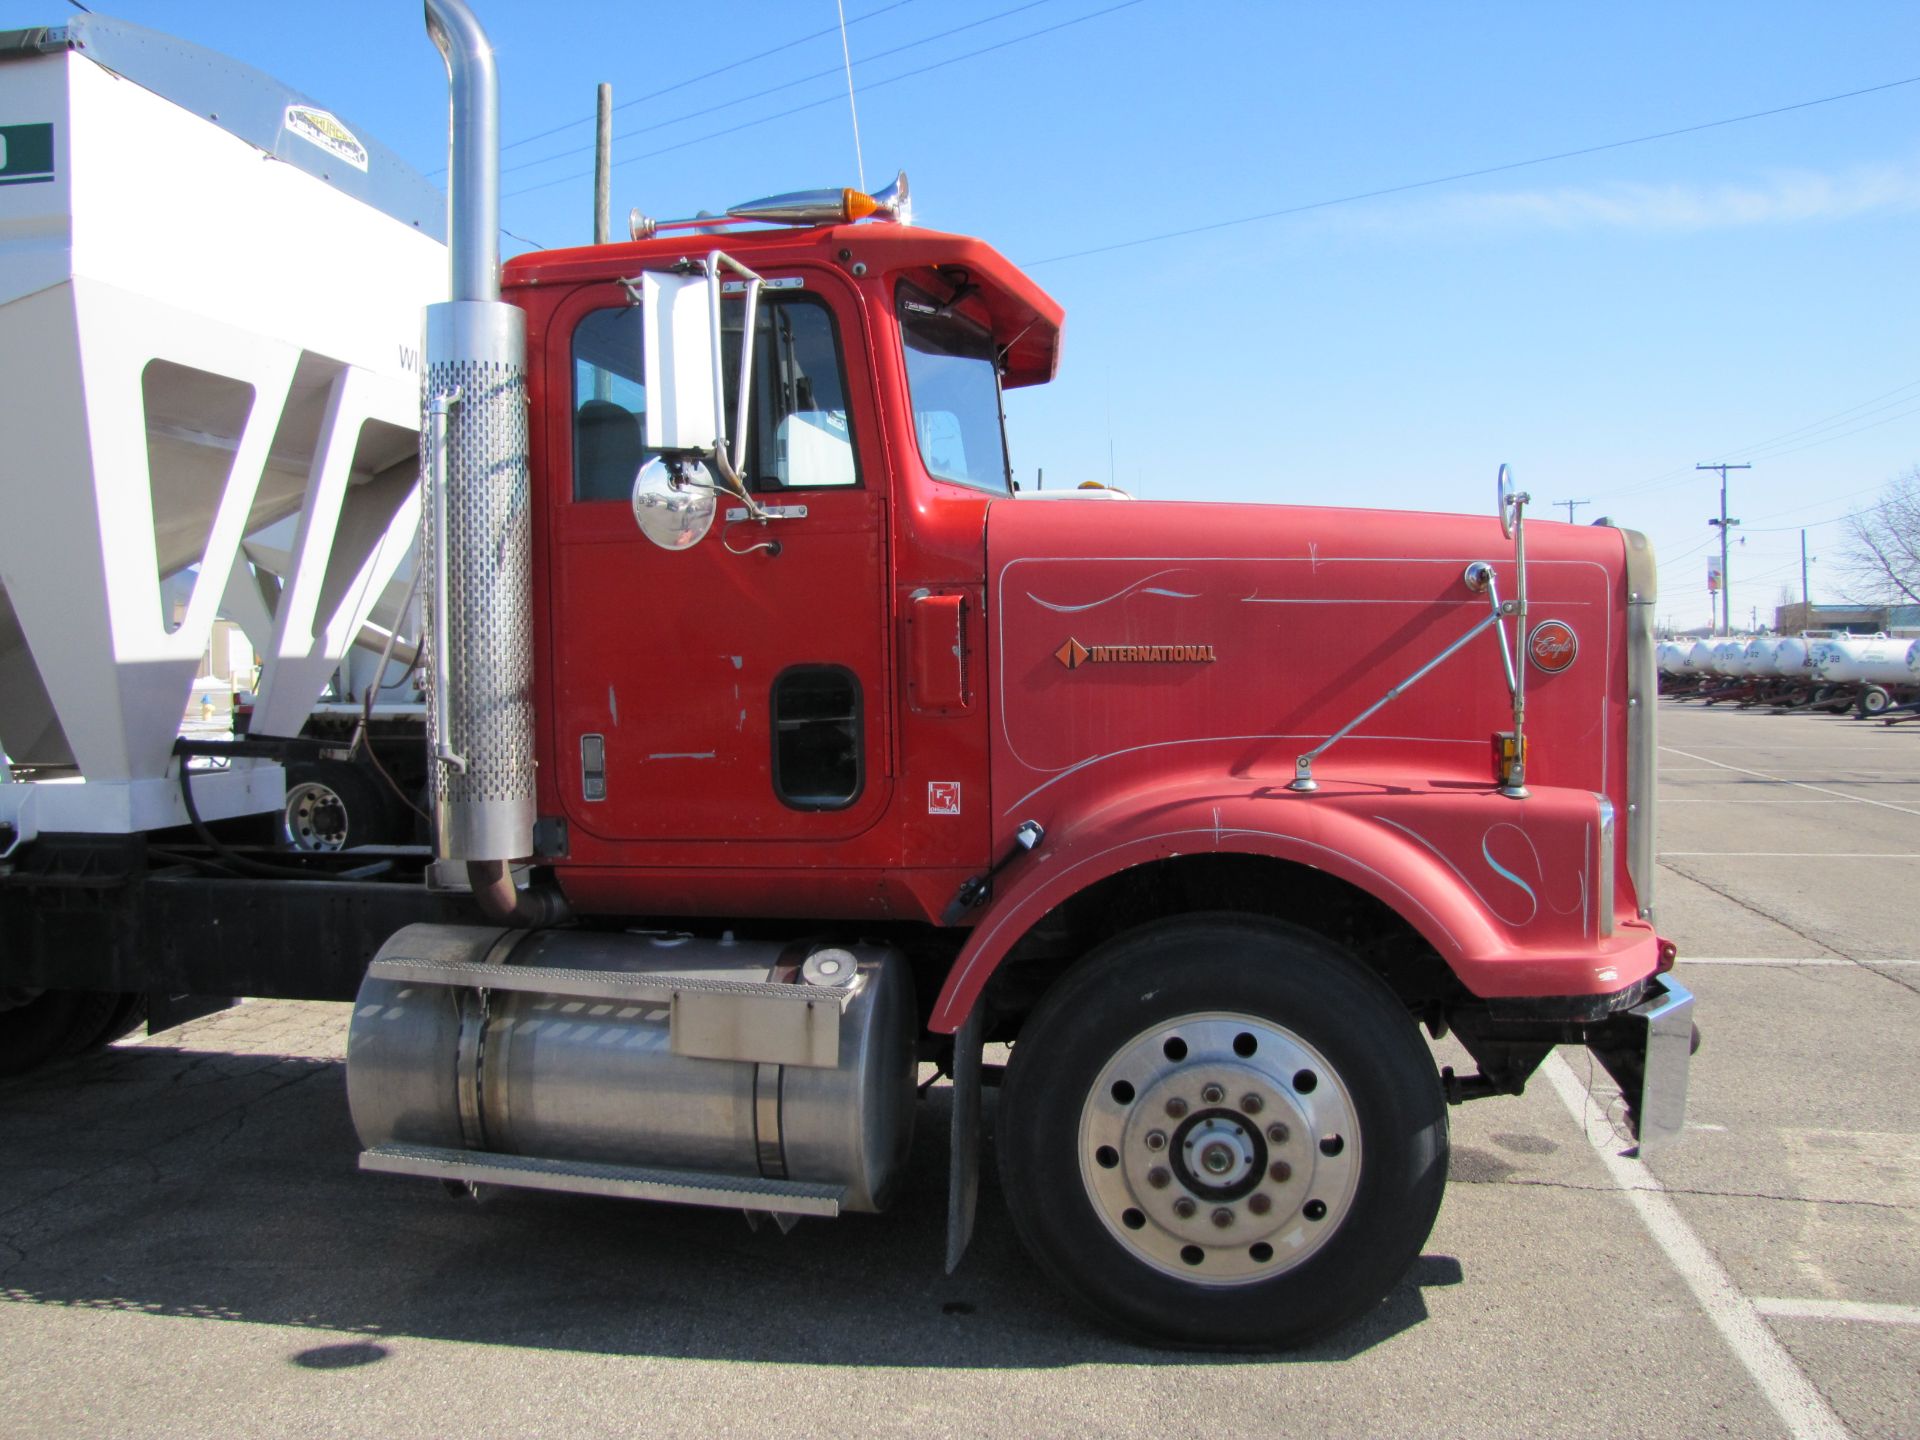 1988 International Eagle 9300, day cab, air ride, wet kit, Cat 3406P, Fuller 13-speed trans - Image 54 of 88